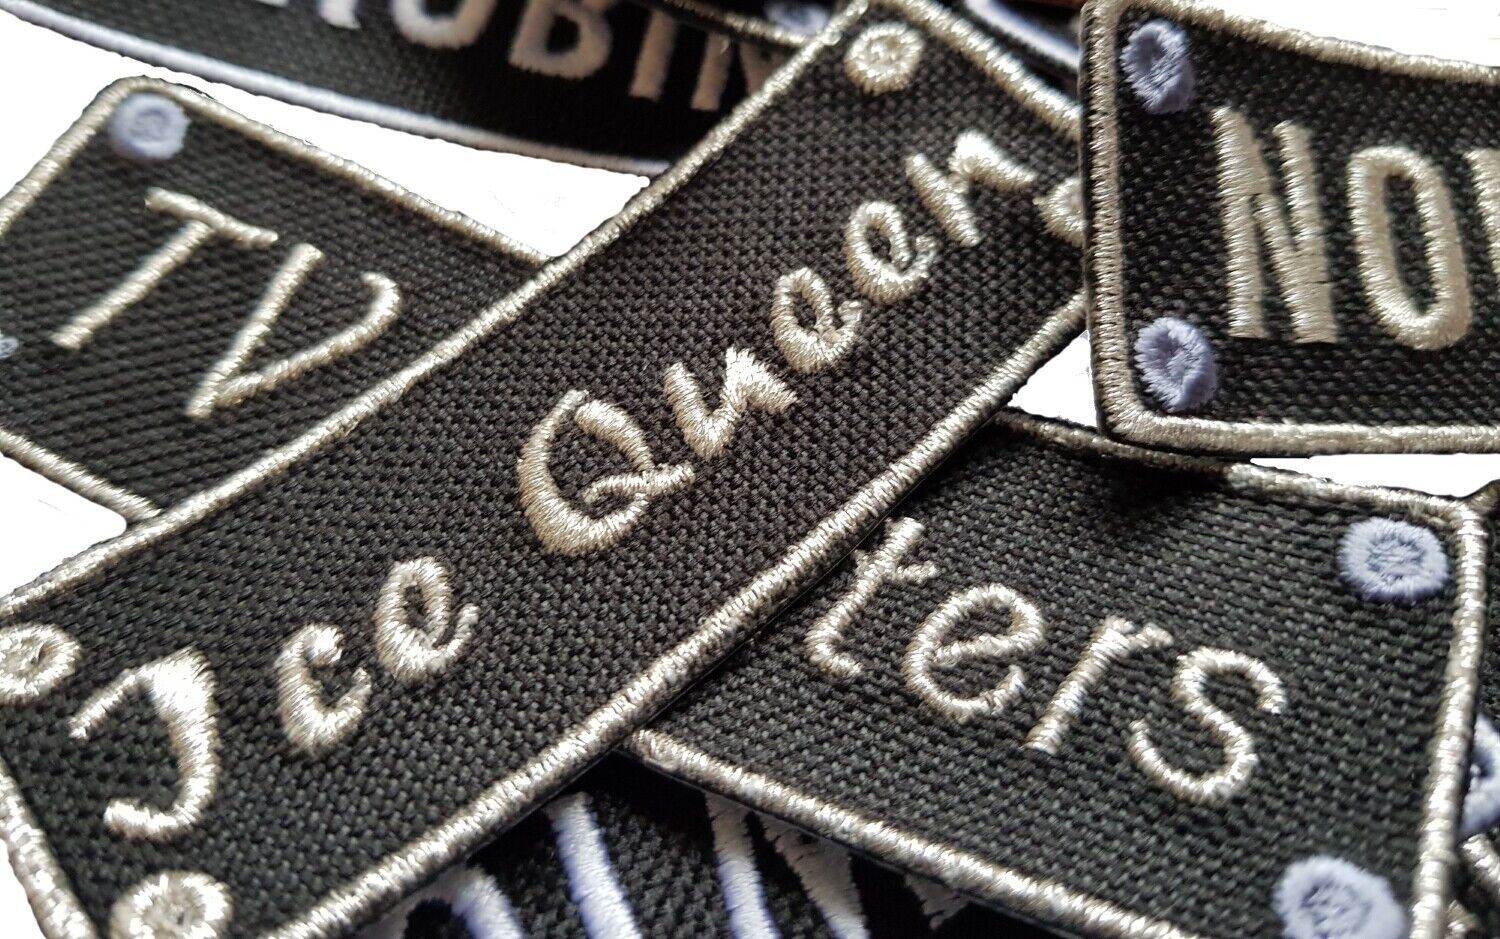 Personalised Name Embroidered Patches Sew Iron On Hook&Loop Badge Biker Applique